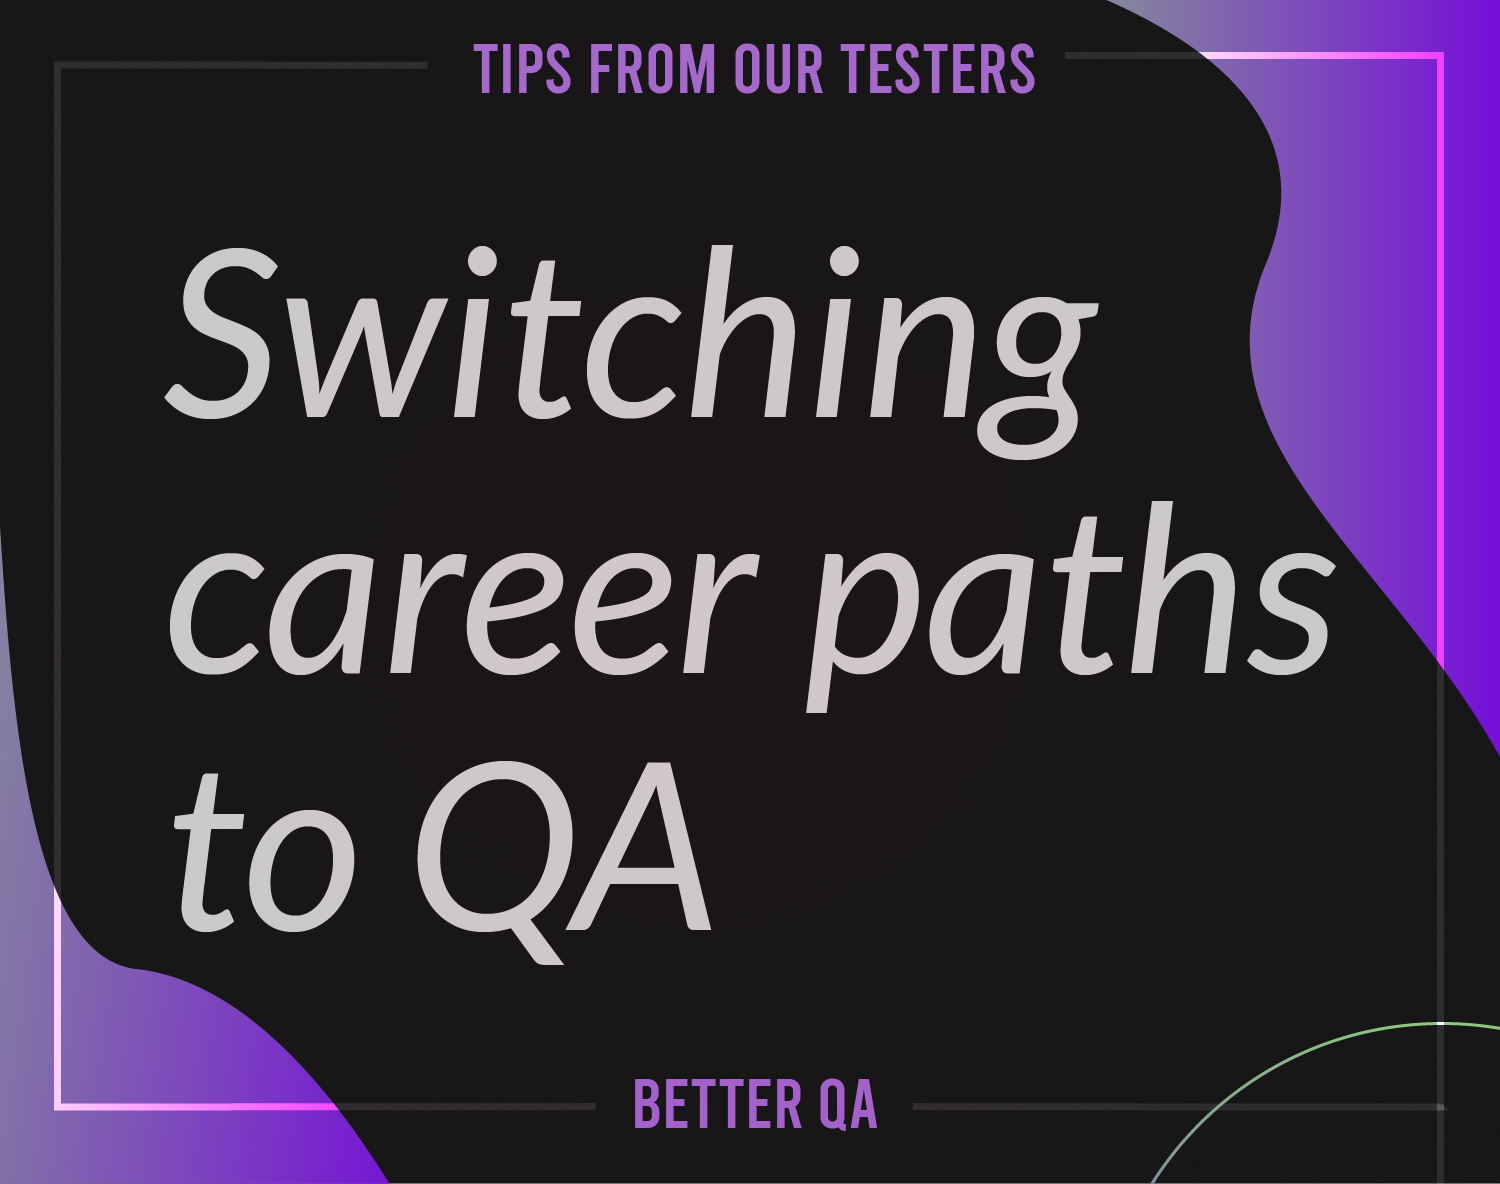 software testing career path: switching to qa part i